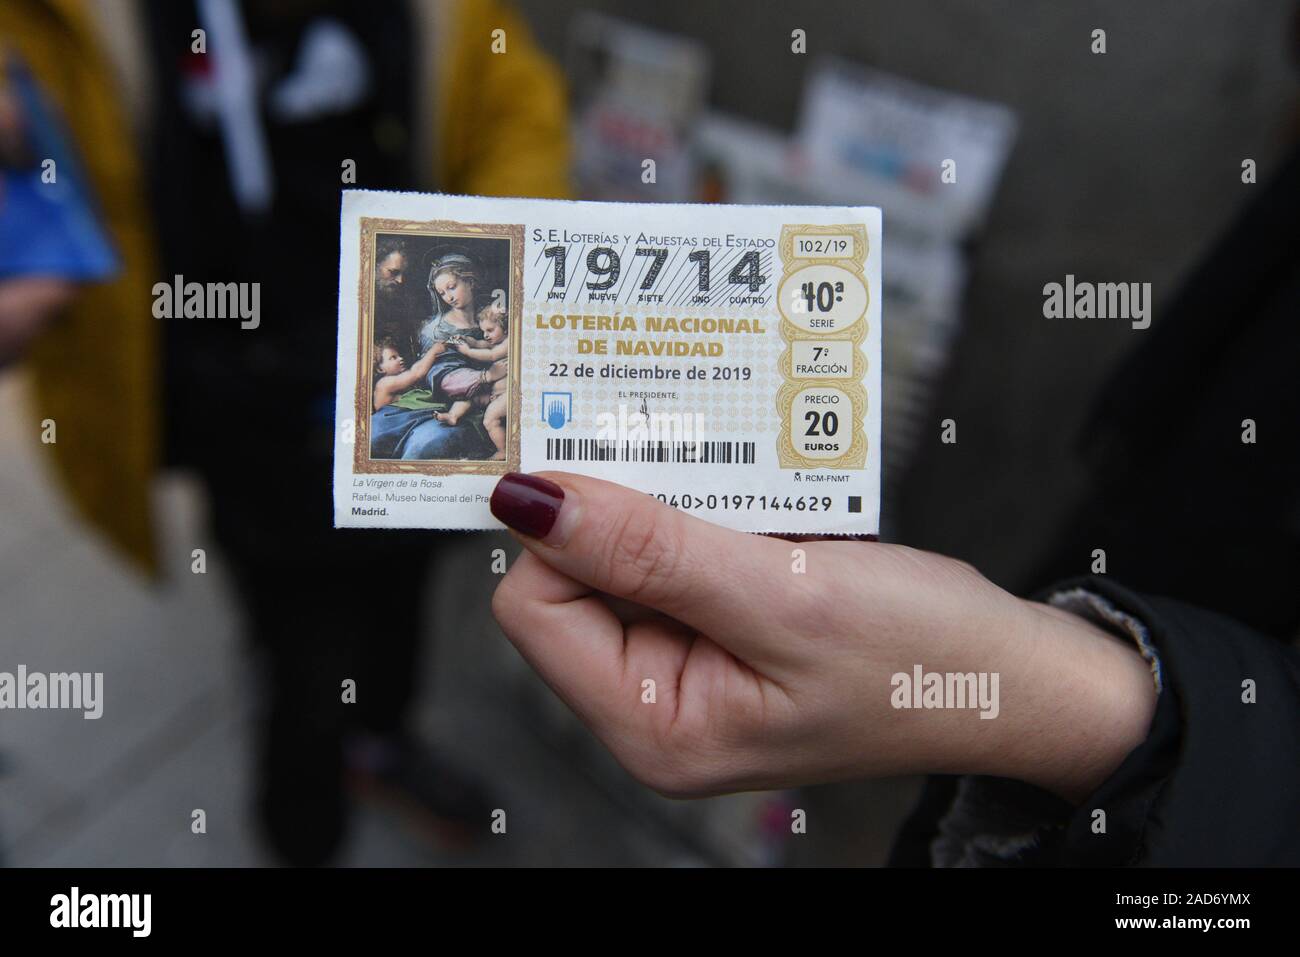 Madrid, Spain. 3rd Dec, 2019. A spanish Christmas El Gordo lottery ticket seen in Madrid.The famous draw 'El Gordo' would be celebrated on December 22, 2019. More than 2.3 billion euros ($3 billion) in prizes would be distributed. Credit: John Milner/SOPA Images/ZUMA Wire/Alamy Live News Stock Photo